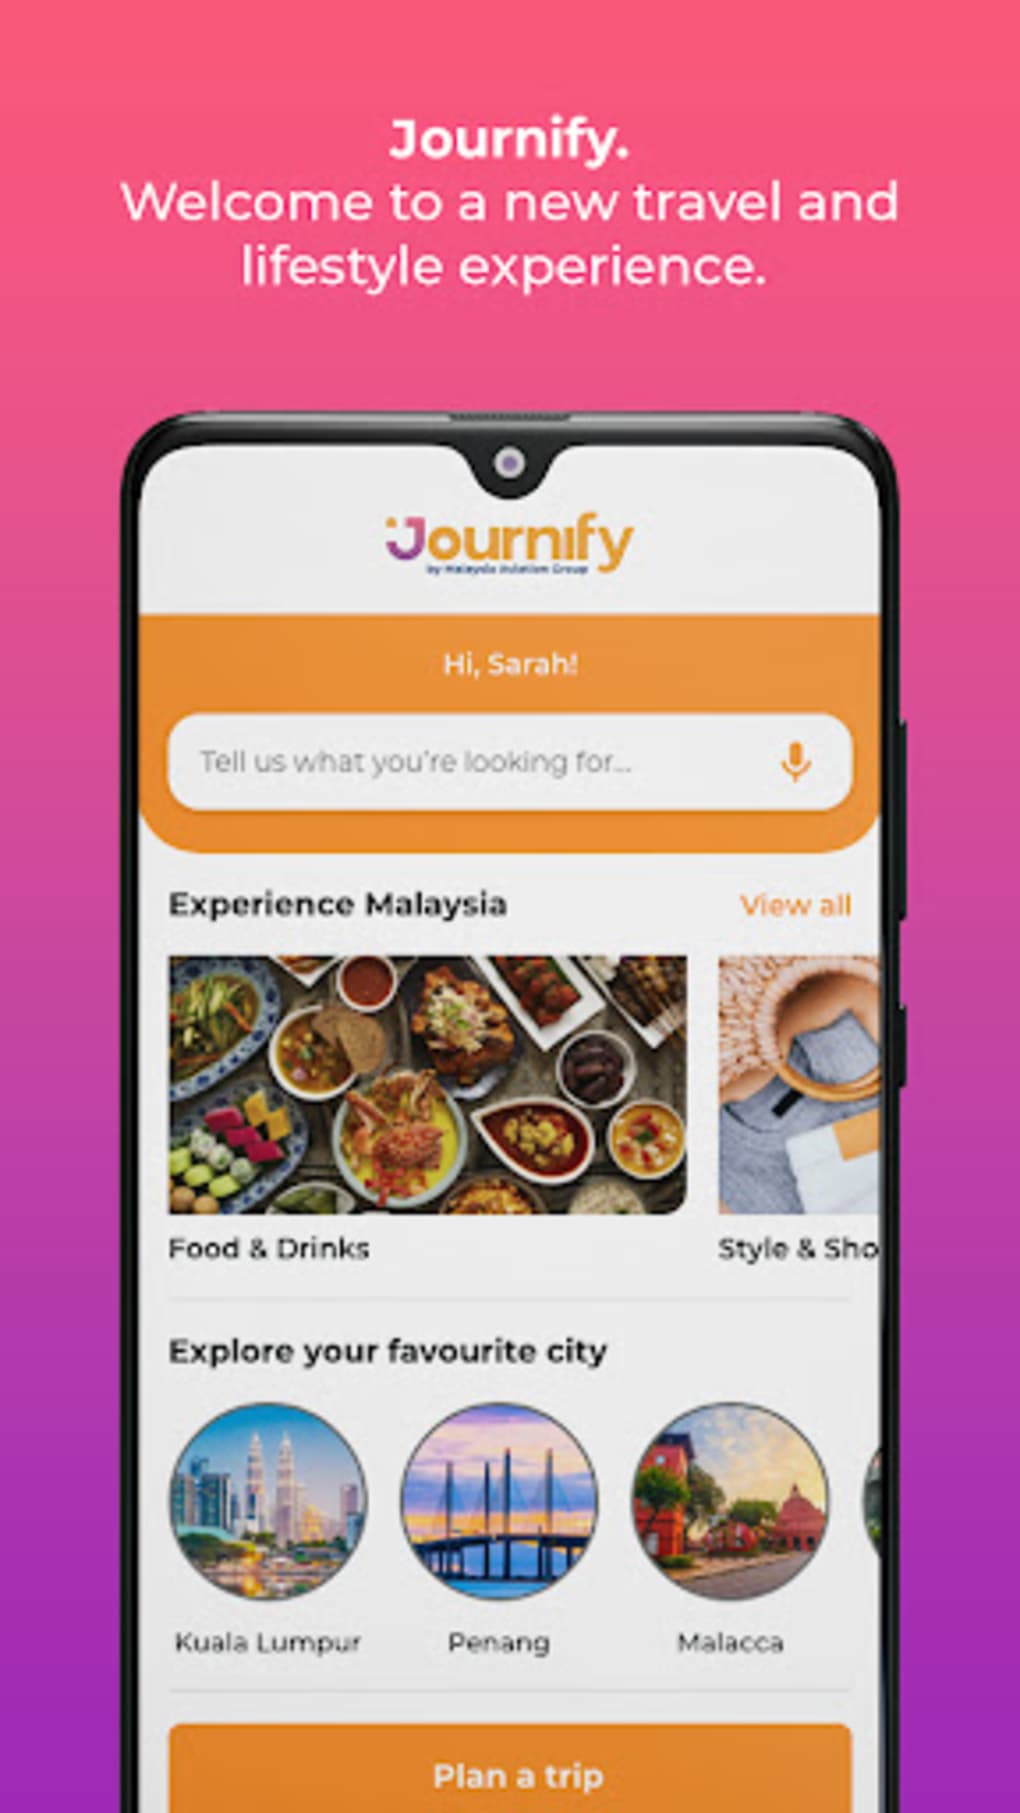 Journify by Malaysia Airlines for Android - Download